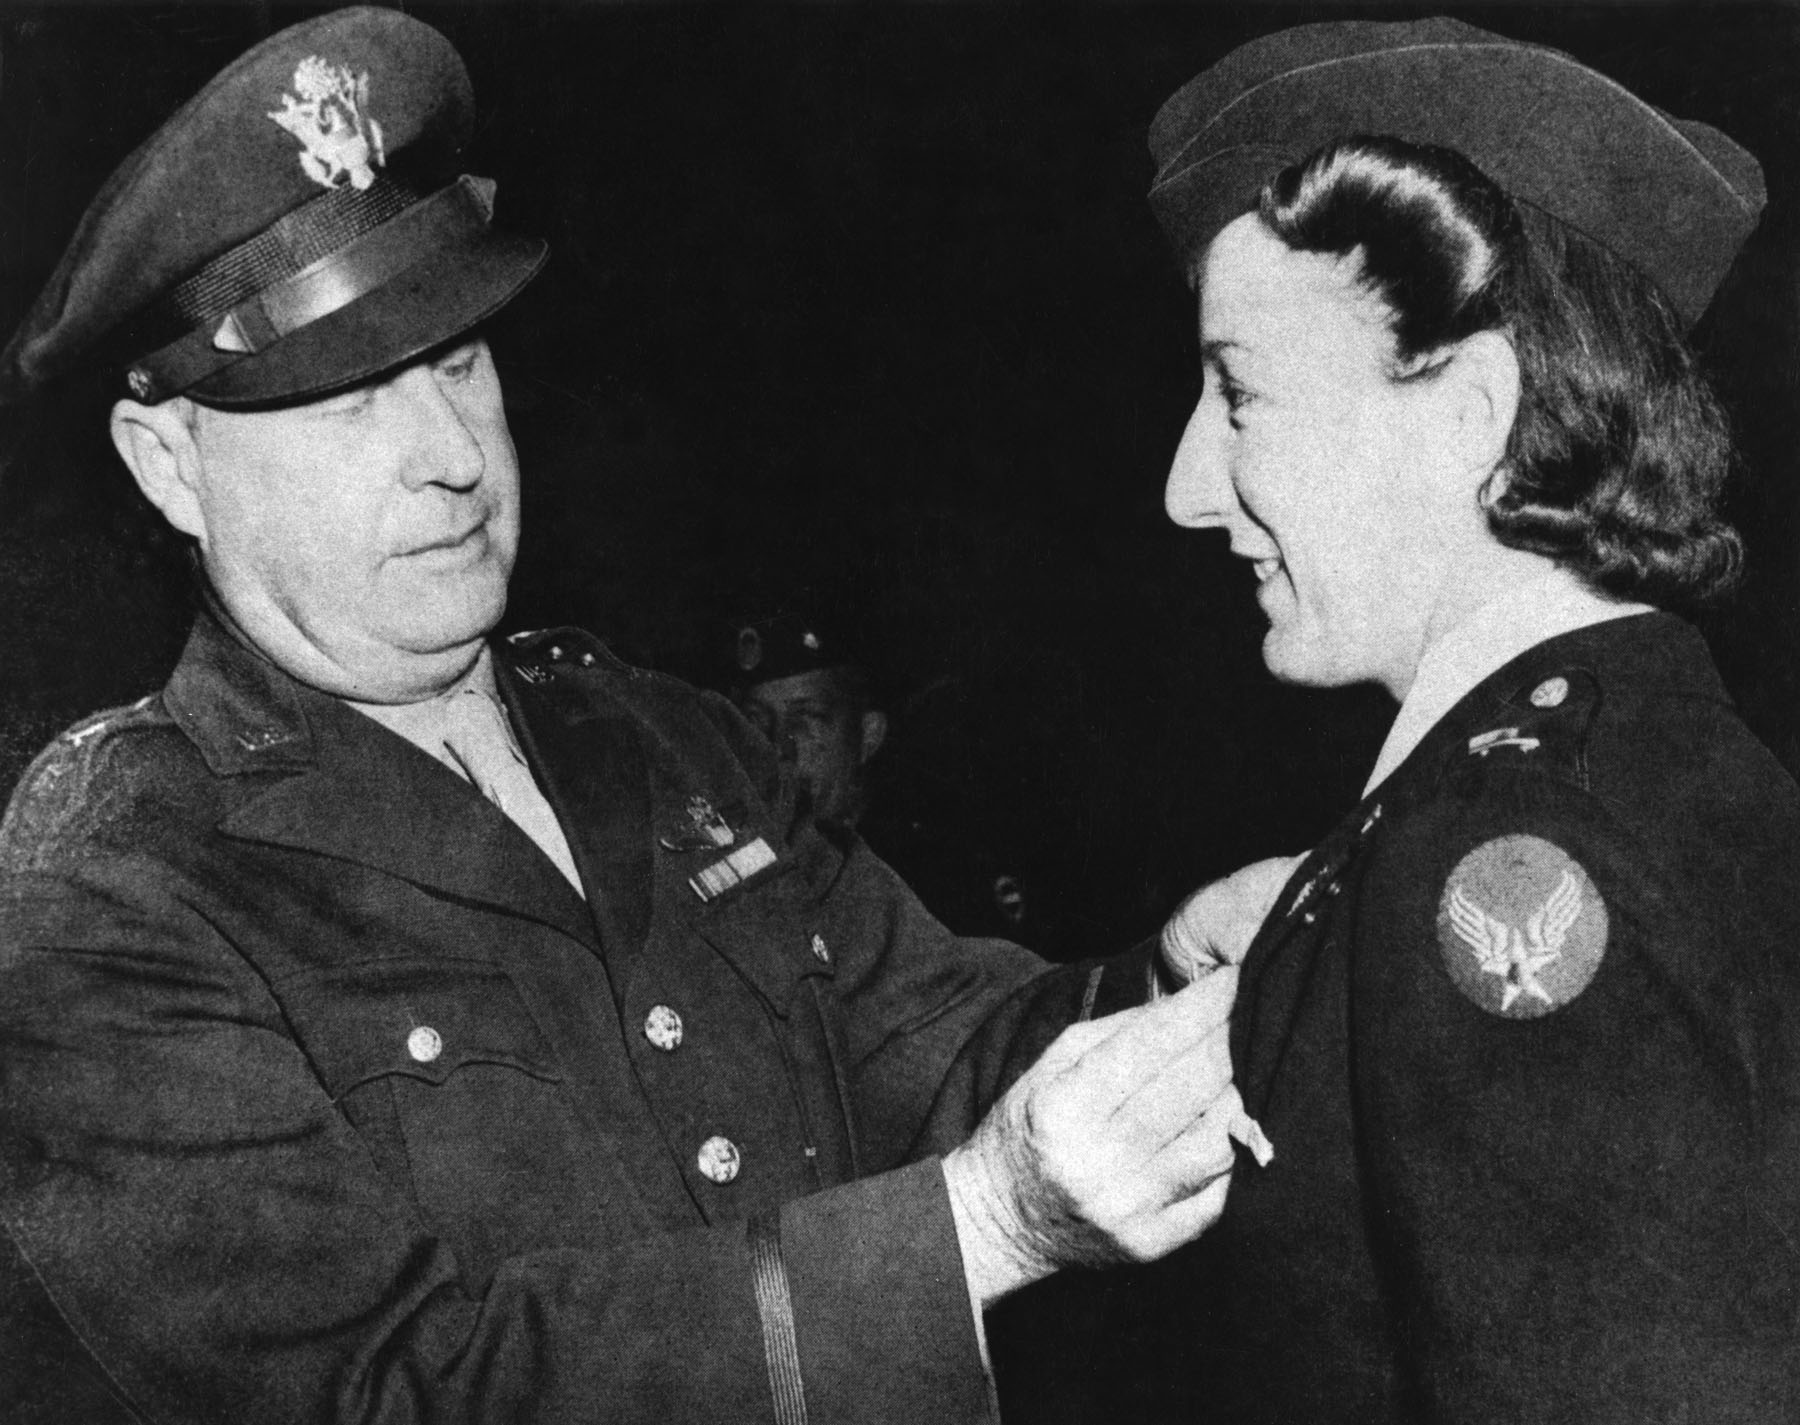 Brig. Gen. Fred Borum presents the Air Medal to Lt. Elsie Ott, the first woman to receive the Air Medal (US Air Force photo: 090903-F-1234S-014)